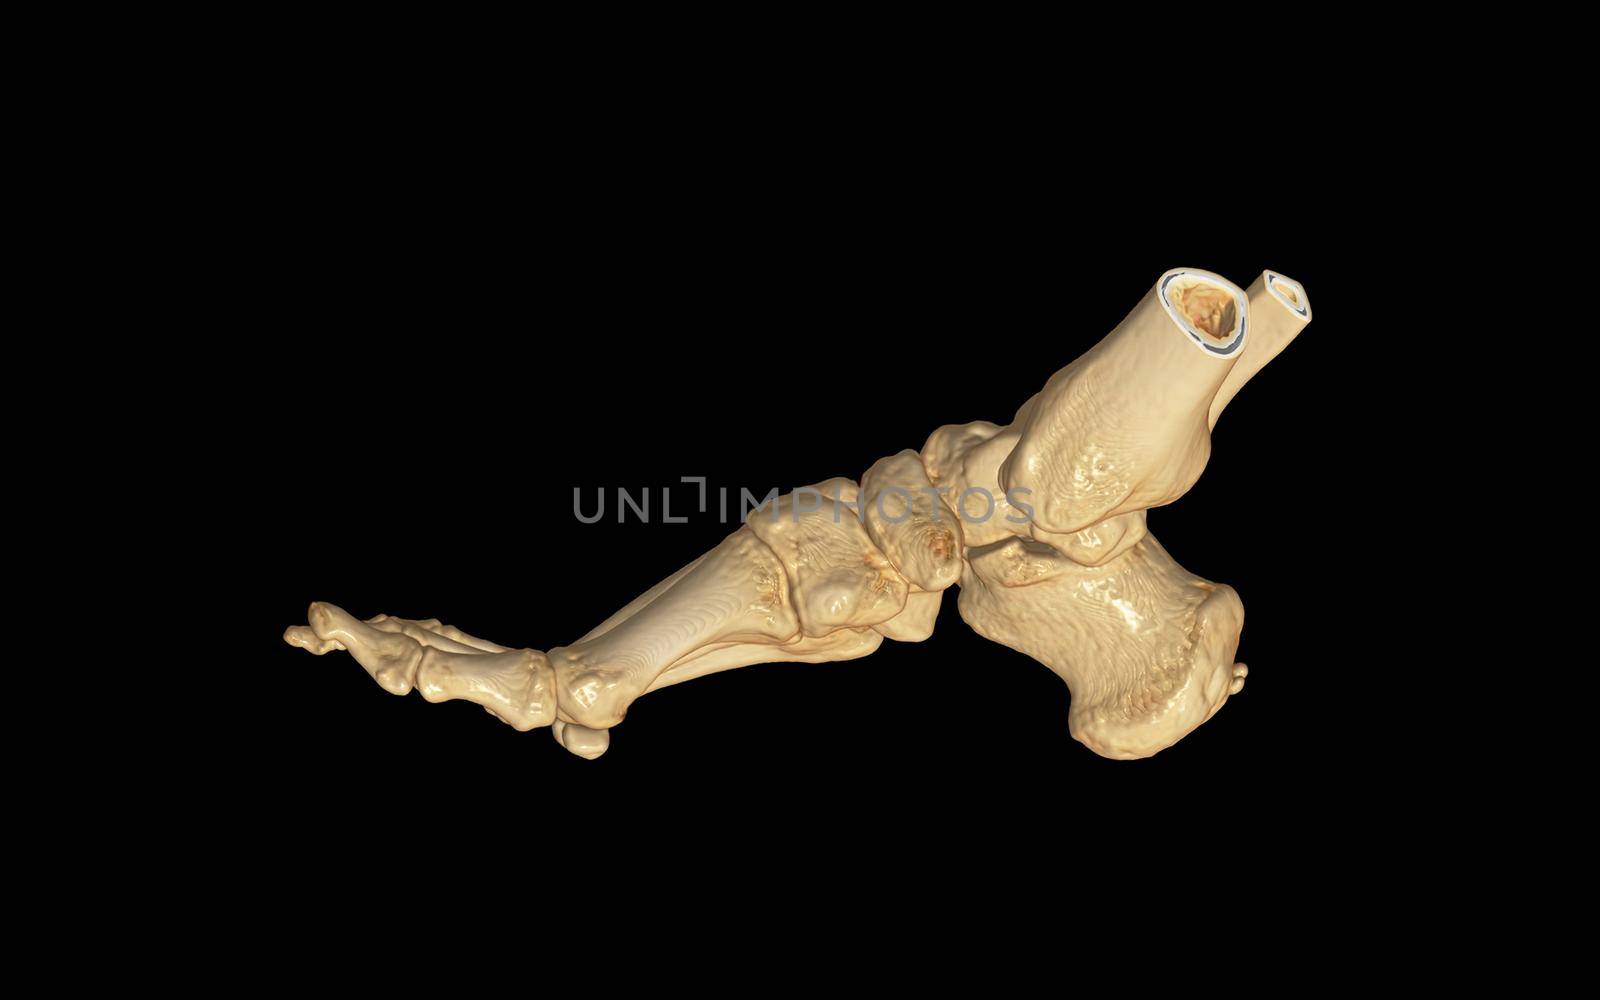 CT Scan of Right Foot 3D rendering image Lateral View .medical technology concept.